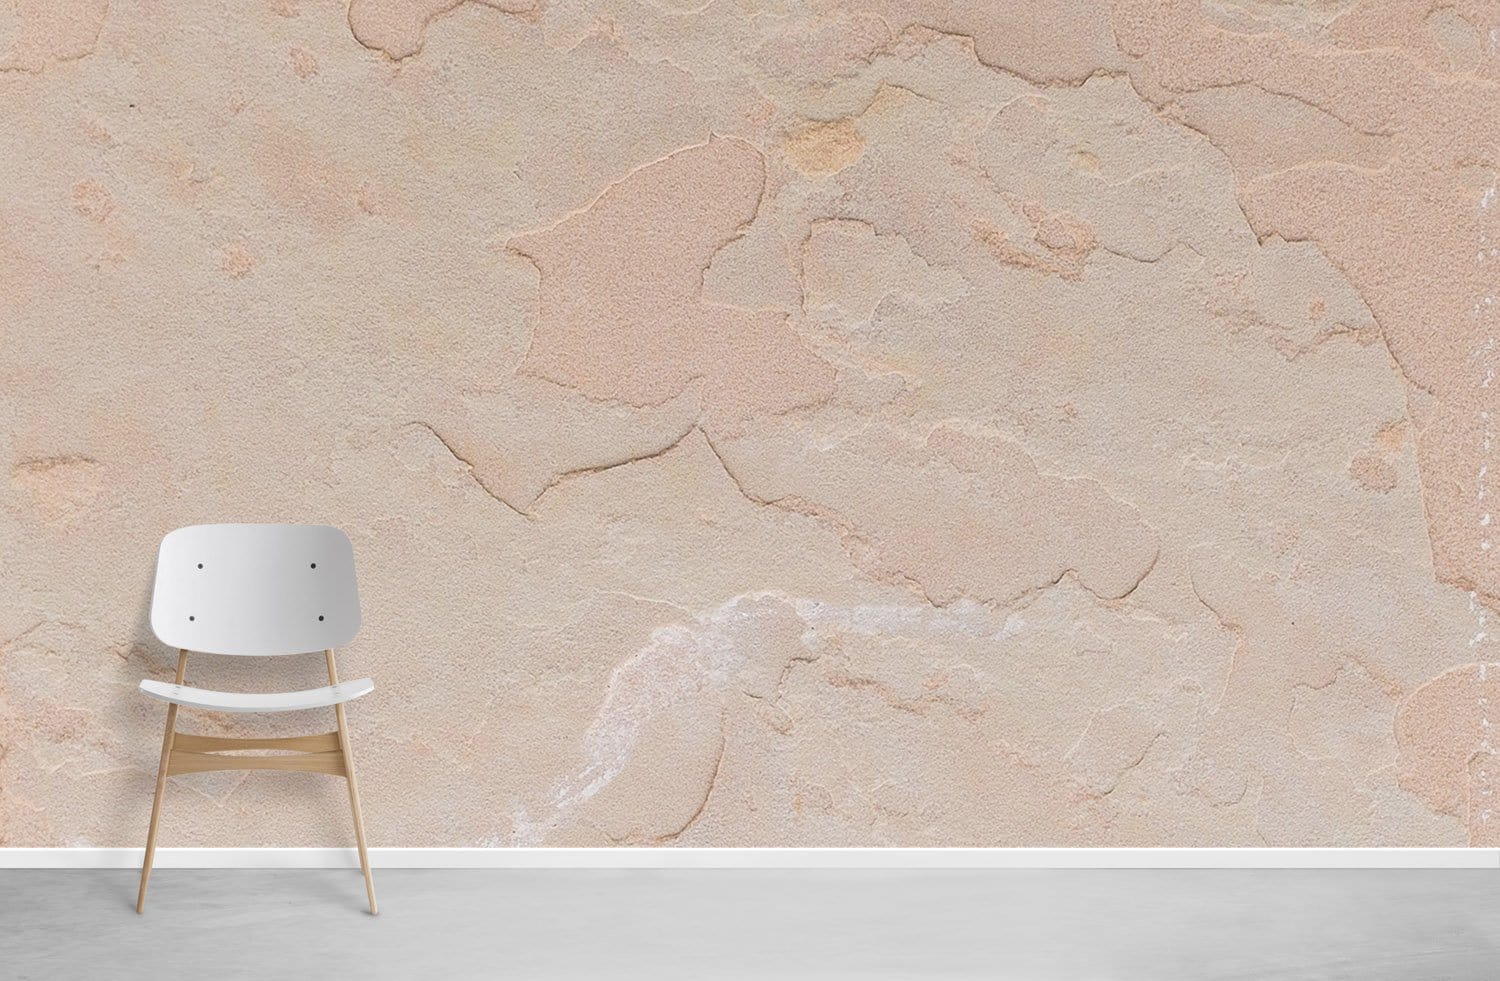 Wall Mural for Home Decoration Featuring a Soft Pink Textured Old Stone Cobbled Background